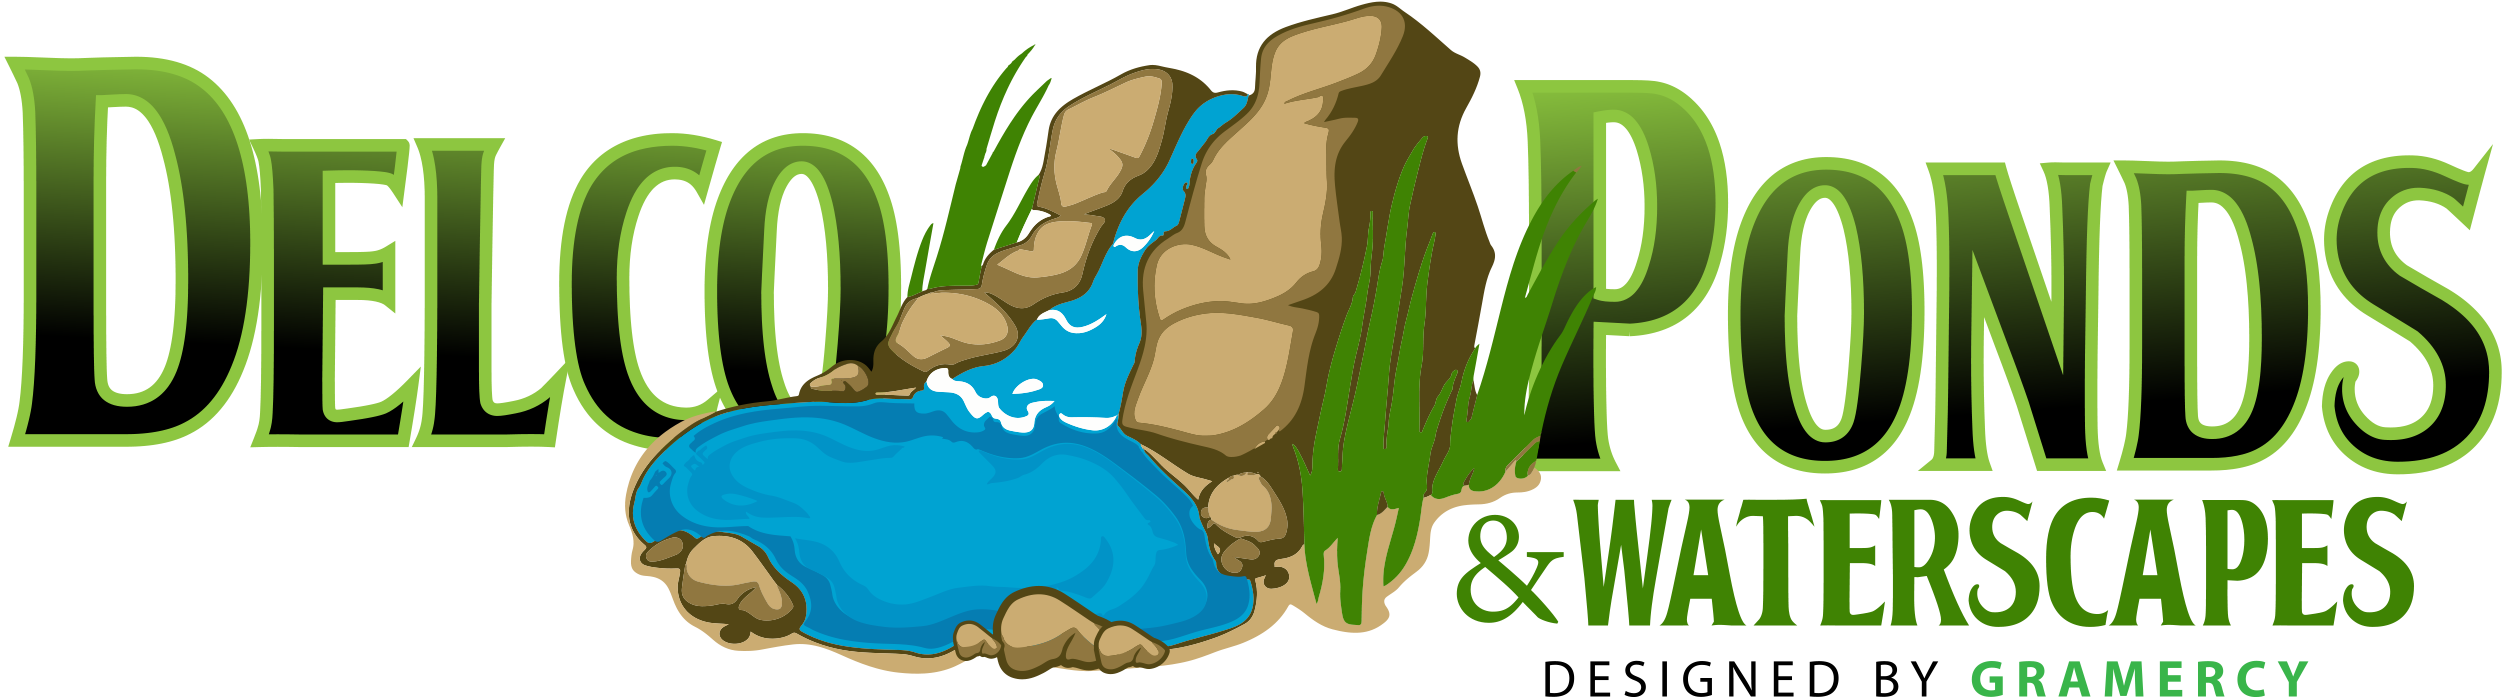 Delco Ponds & WaterScapes logo